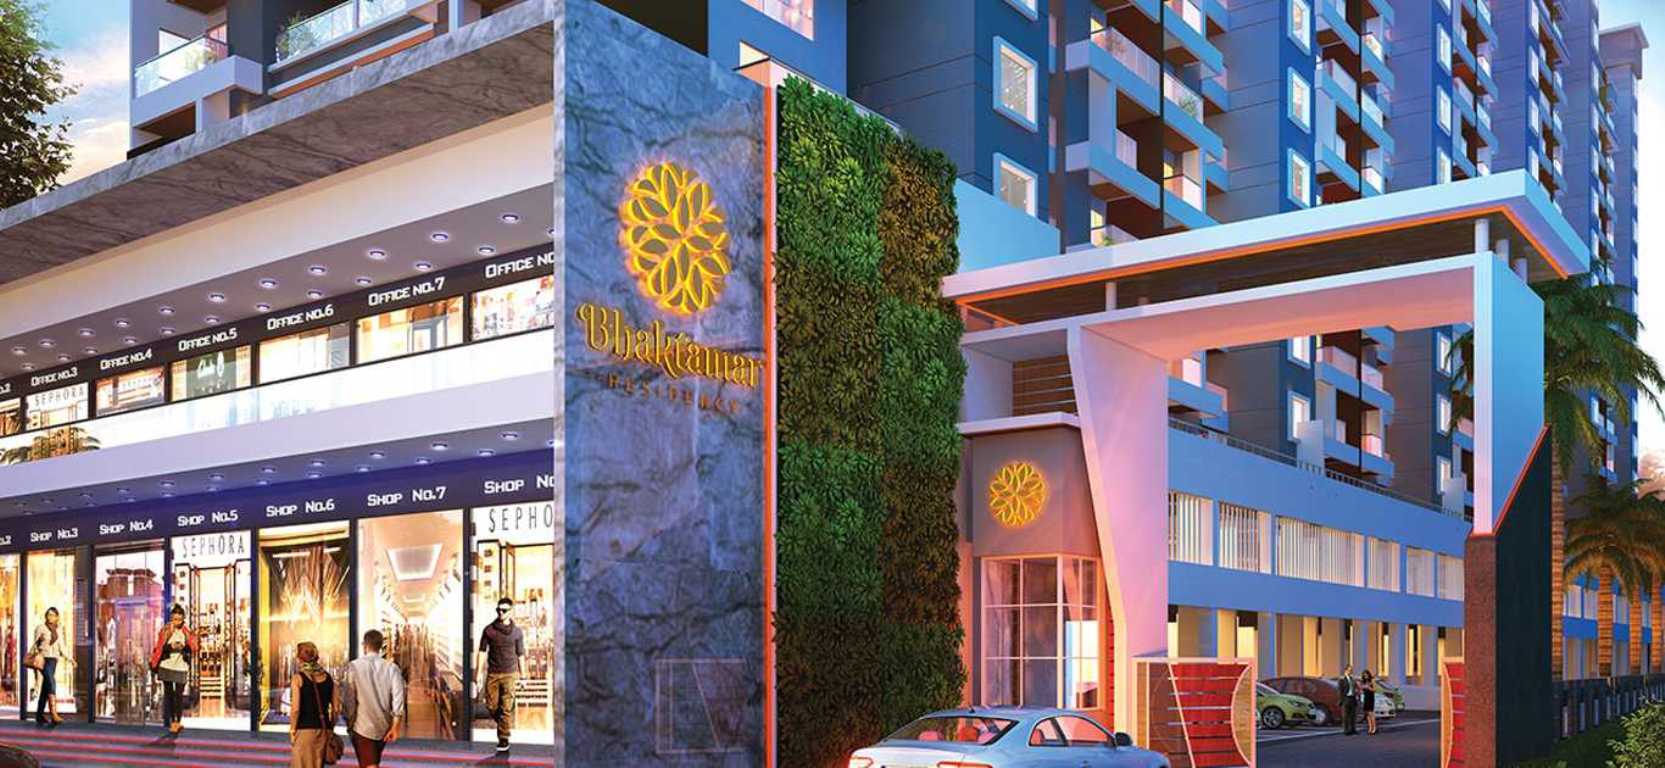 Indulge in a life of luxury and style at Bhaktamar Residency in Pune